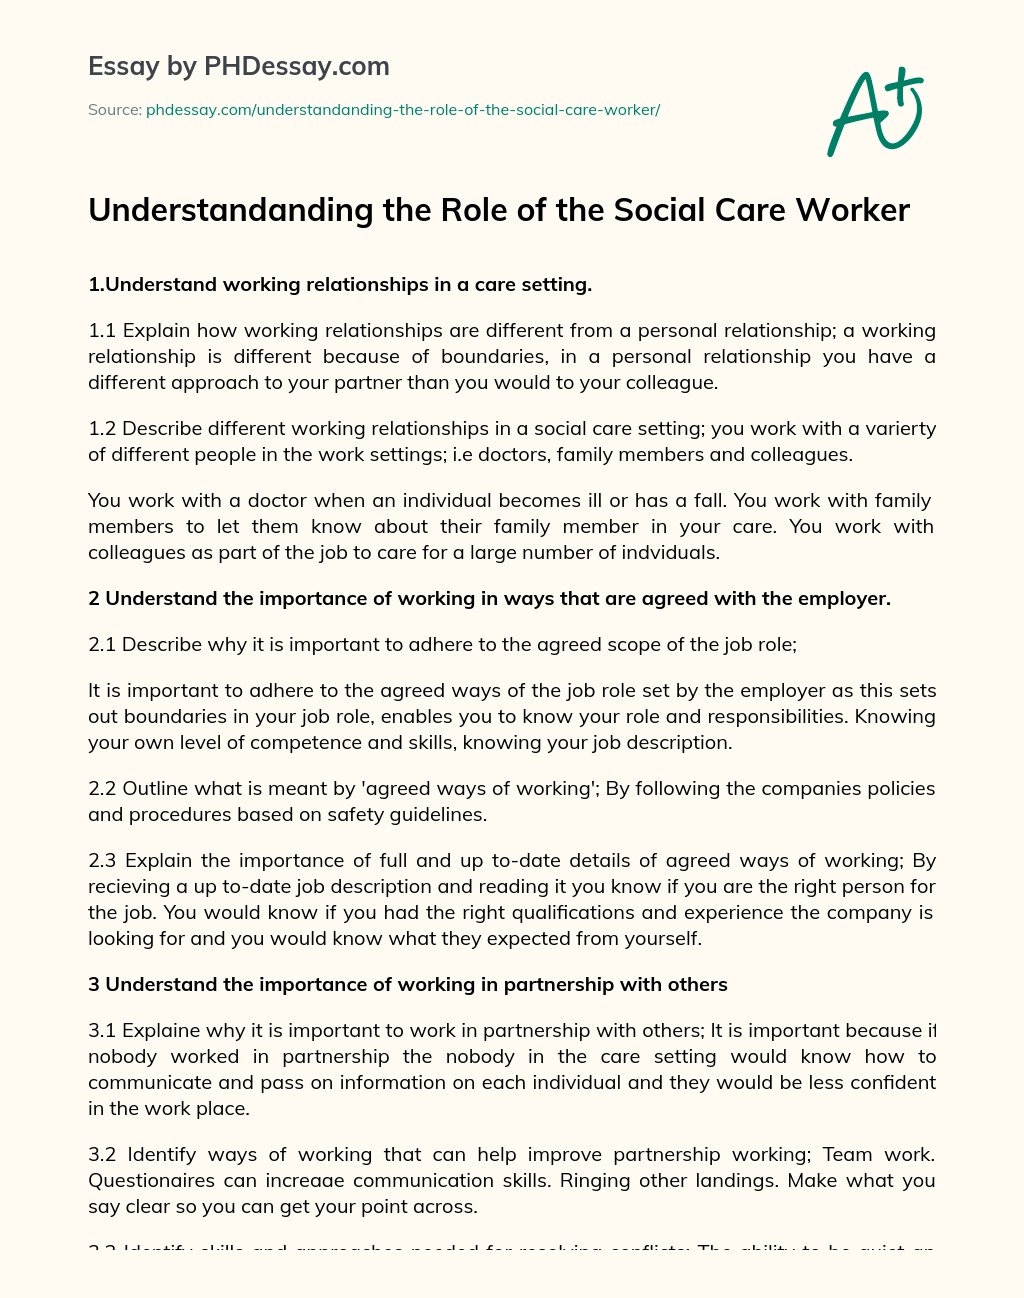 Understandanding the Role of the Social Care Worker essay